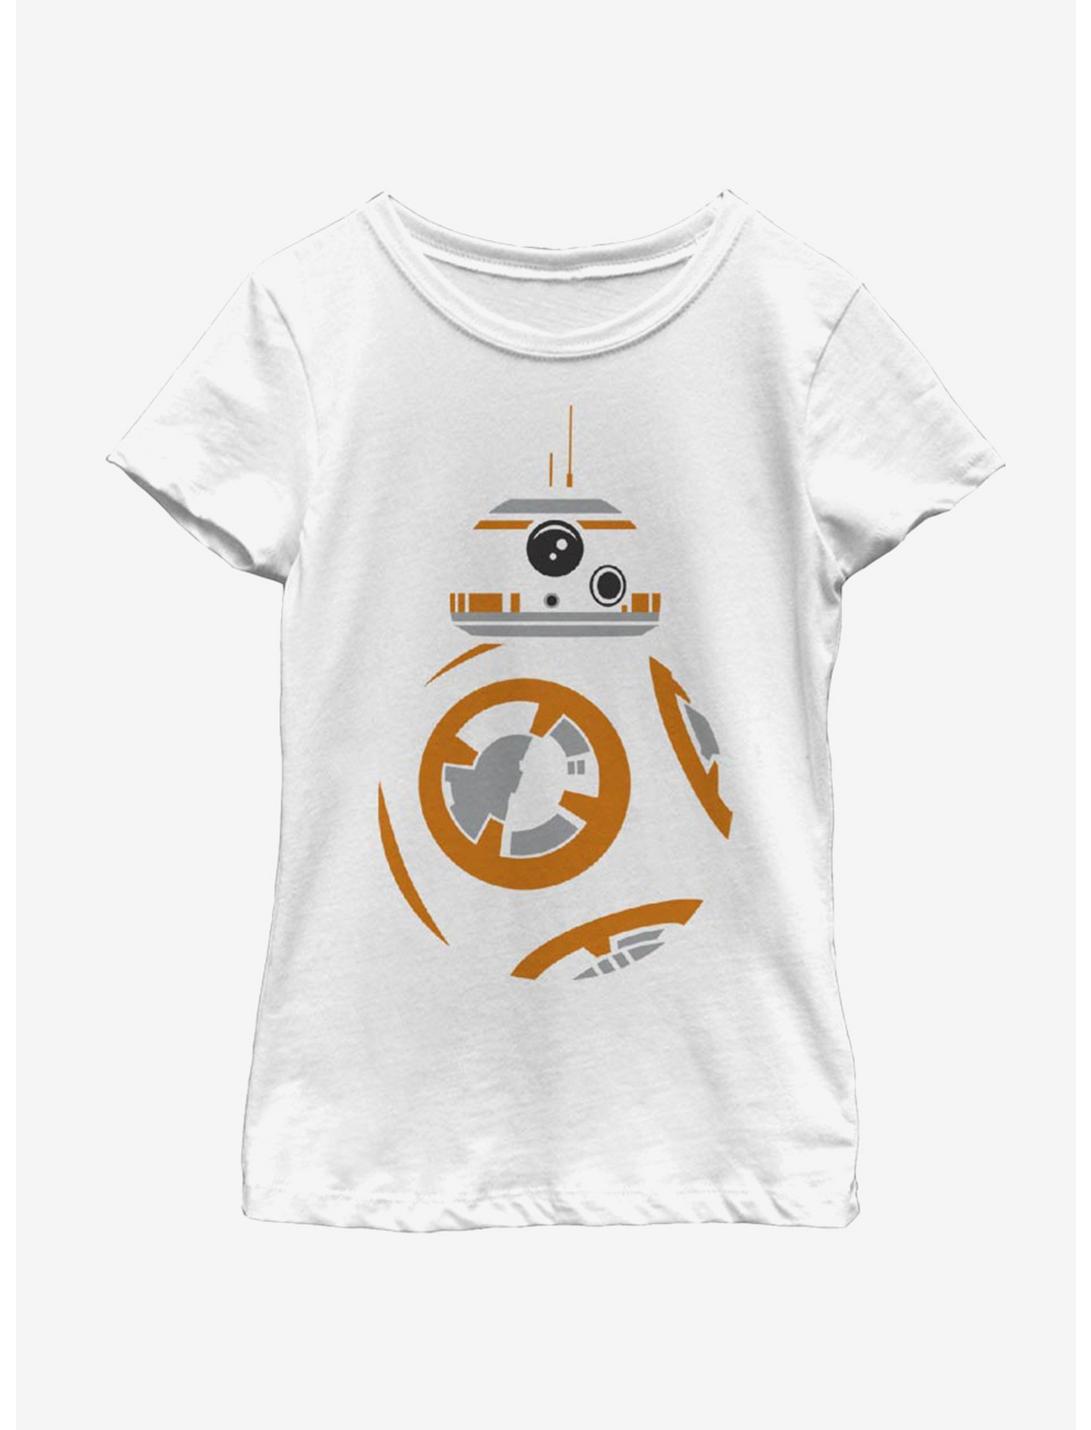 Star Wars The Force Awakens BB8 Face Youth Girls T-Shirt, WHITE, hi-res